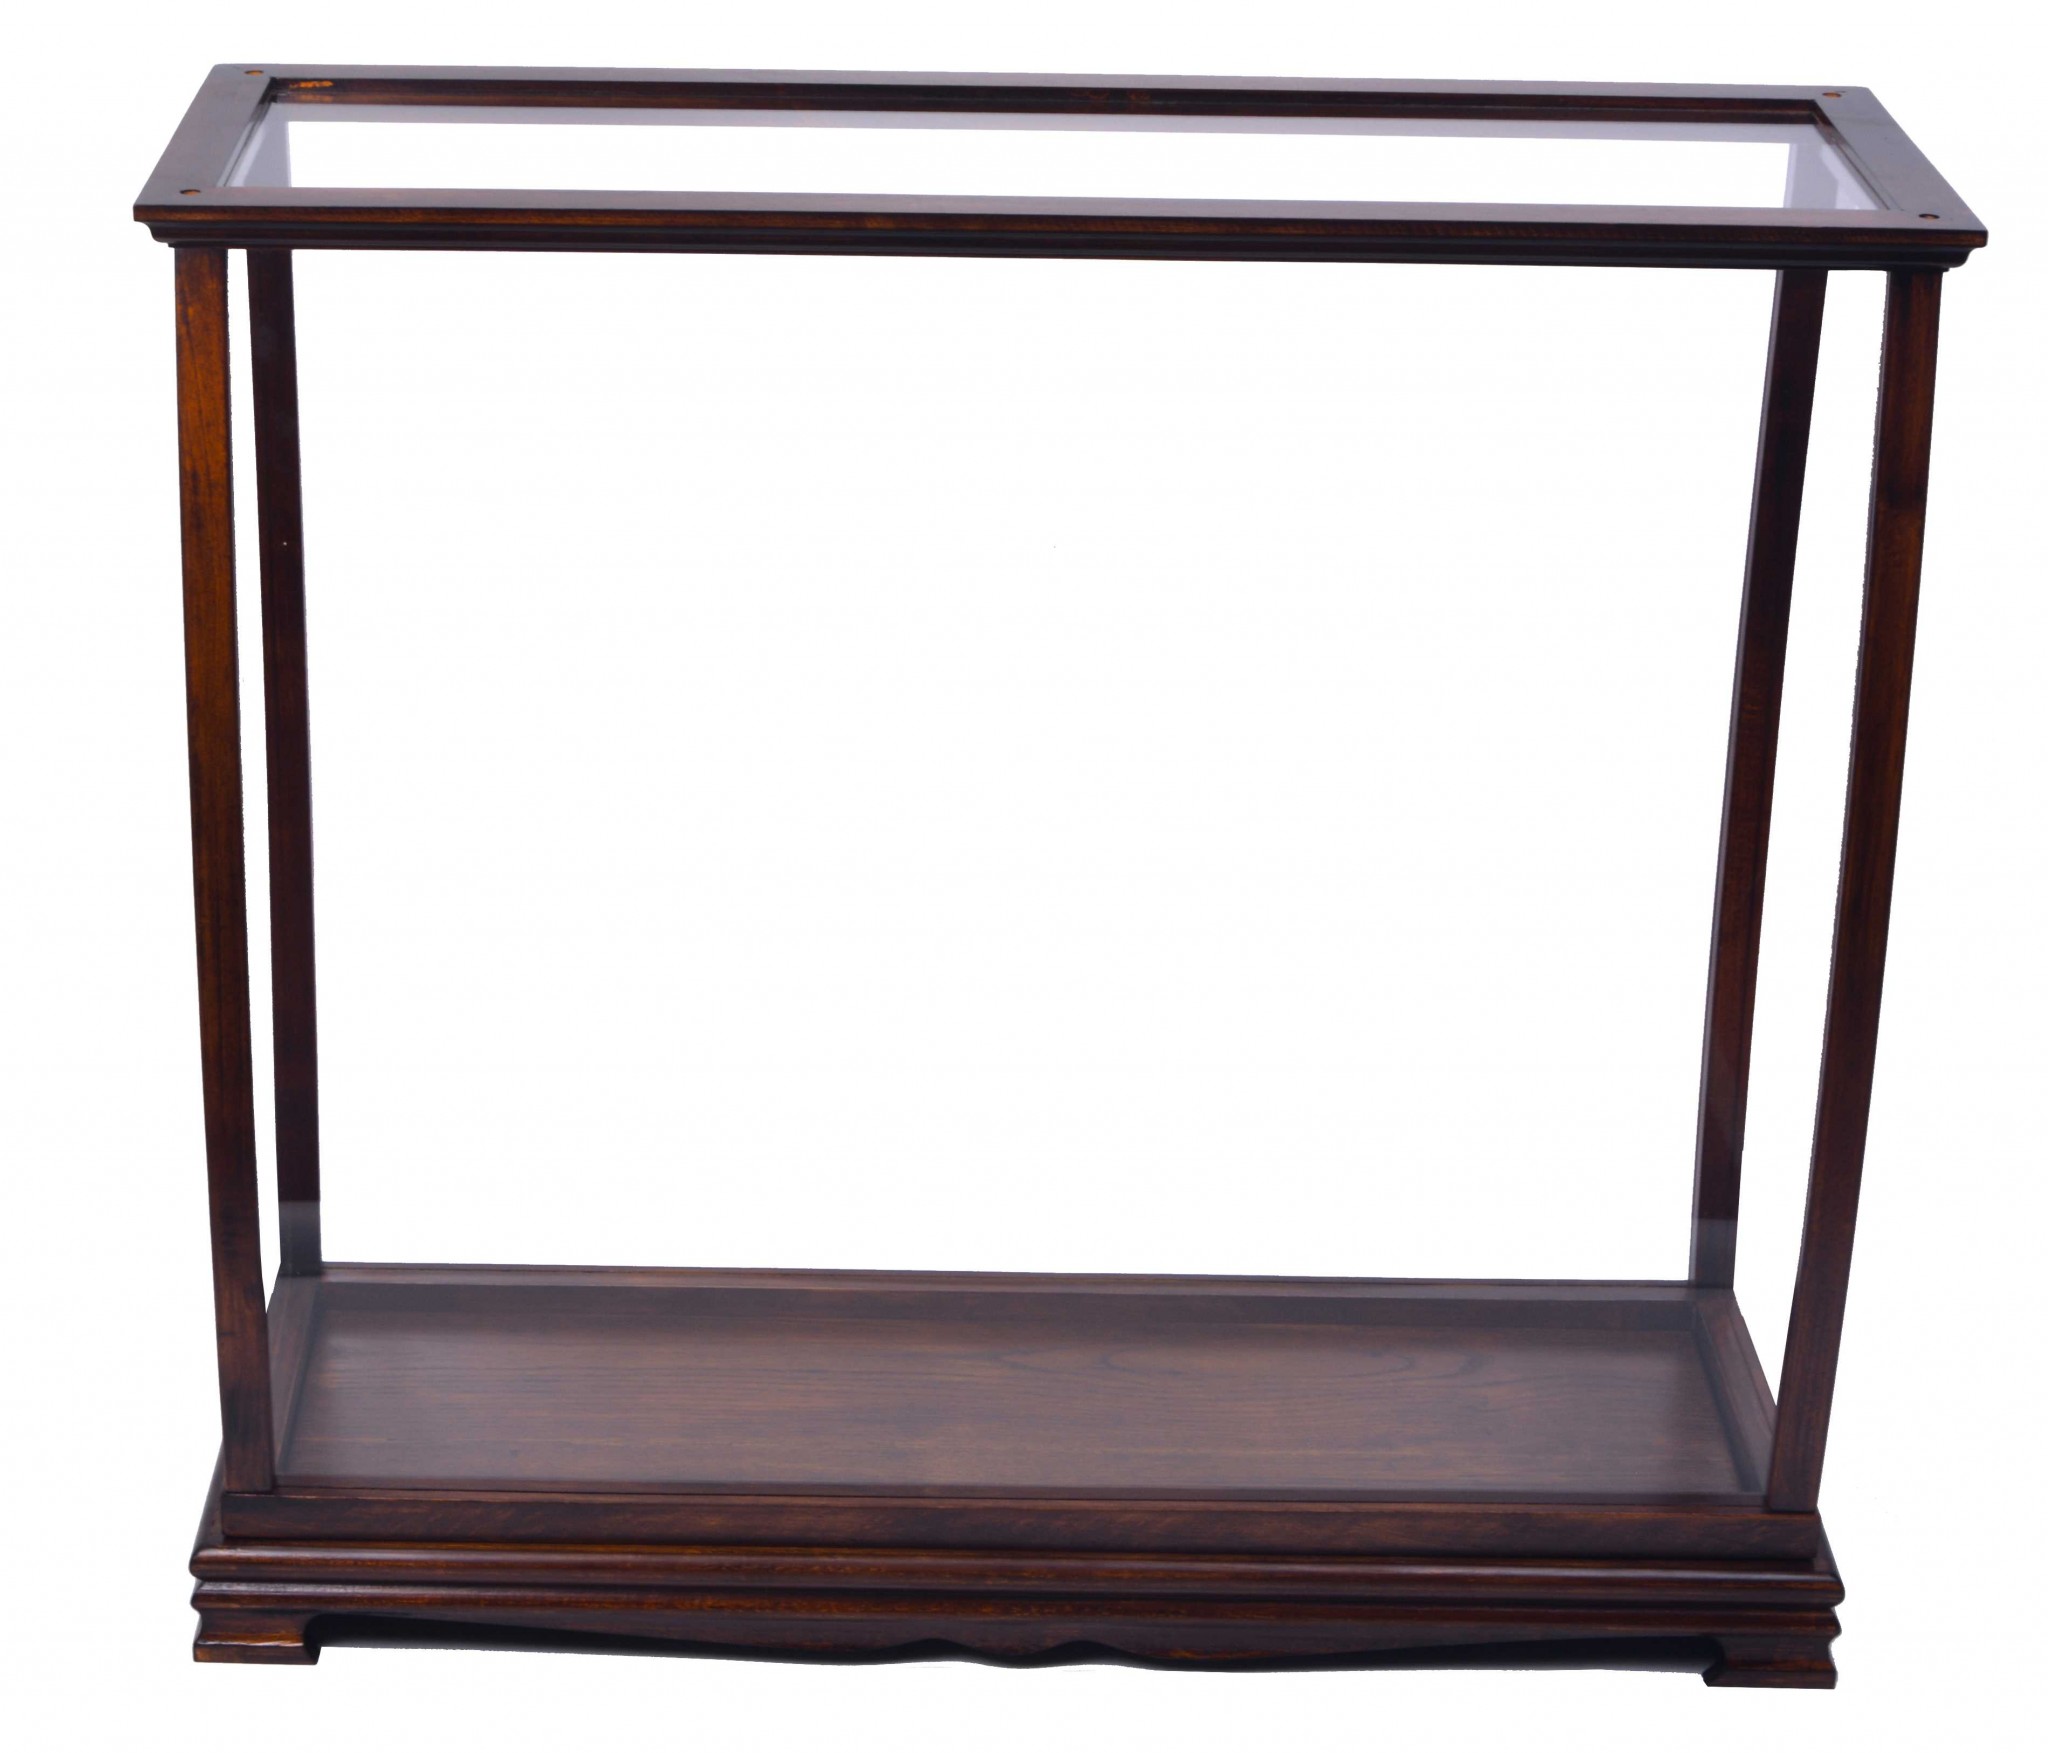 13" x 34" x 31.5" Classic Brown, For Midsize Tall Ship - Display Case